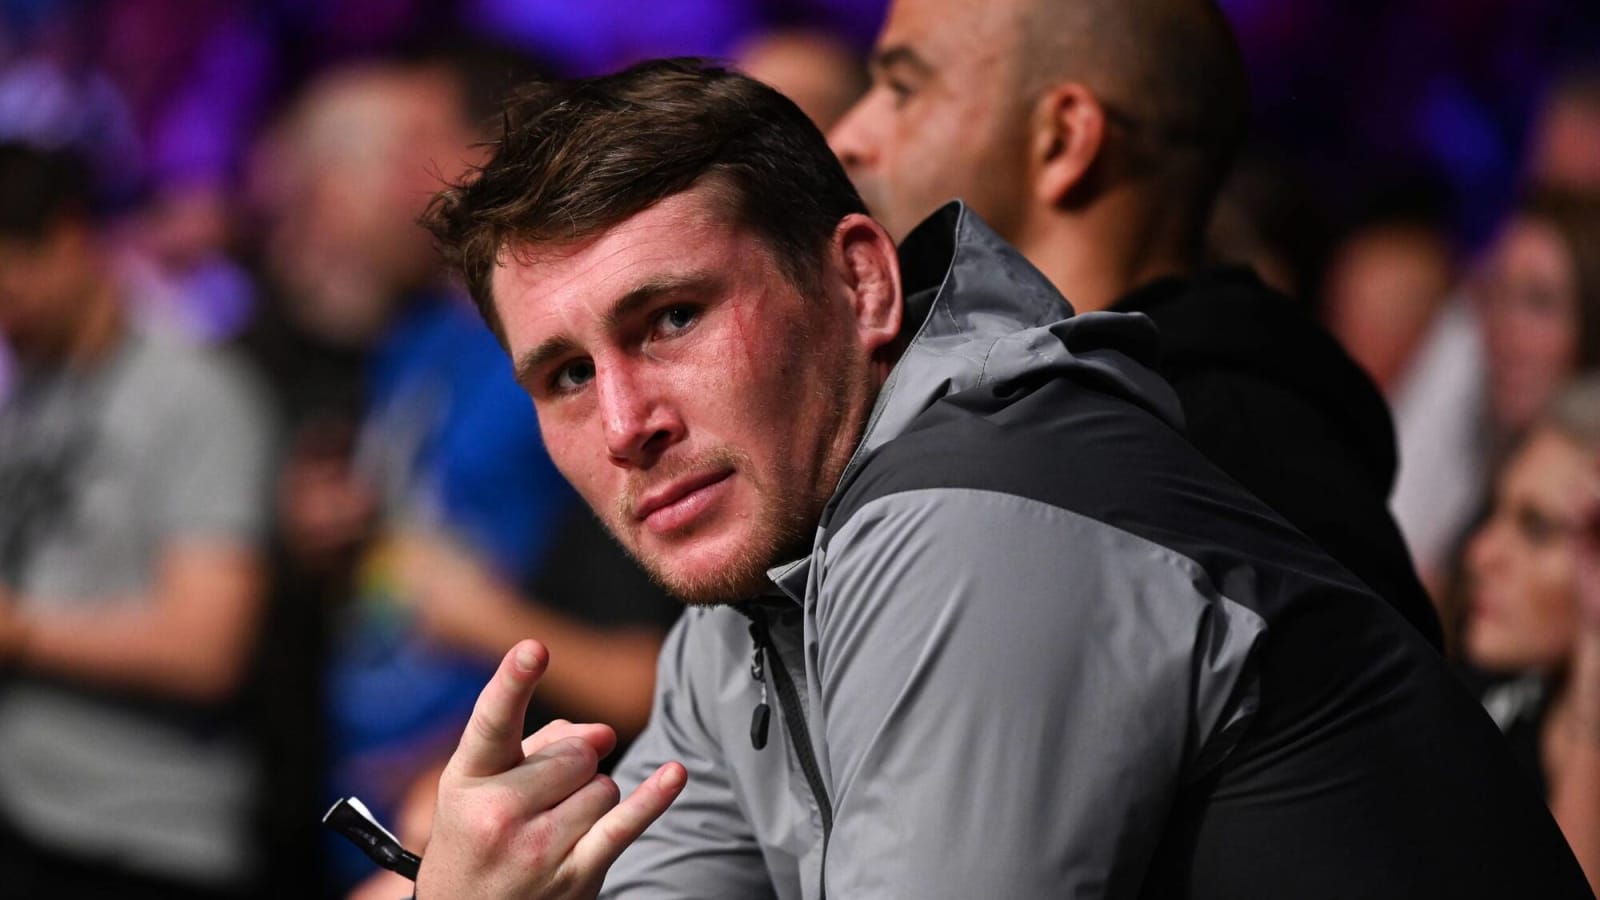 Jake Paul vs. Mike Tyson Undercard Will Now Feature Former UFC Star Darren Till Facing The Son Of A Boxing Icon